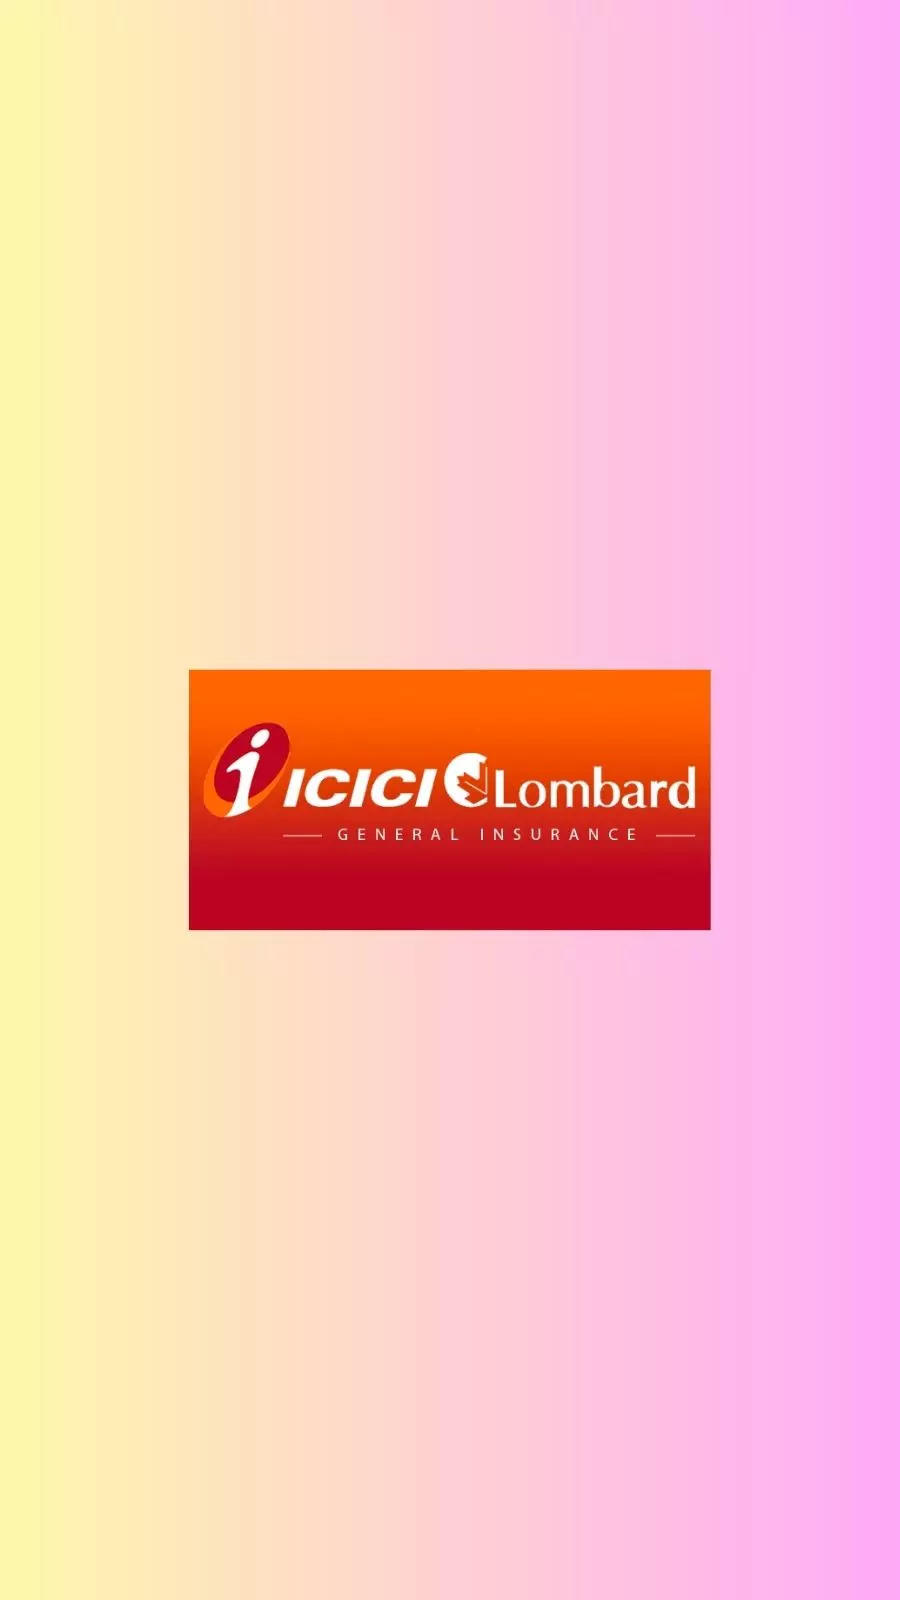 BIG BLOW for ICICI Lombard! Pune GST Authority slaps Rs 1728 cr tax demand  on insurance company | Here's why | Companies News, ET Now